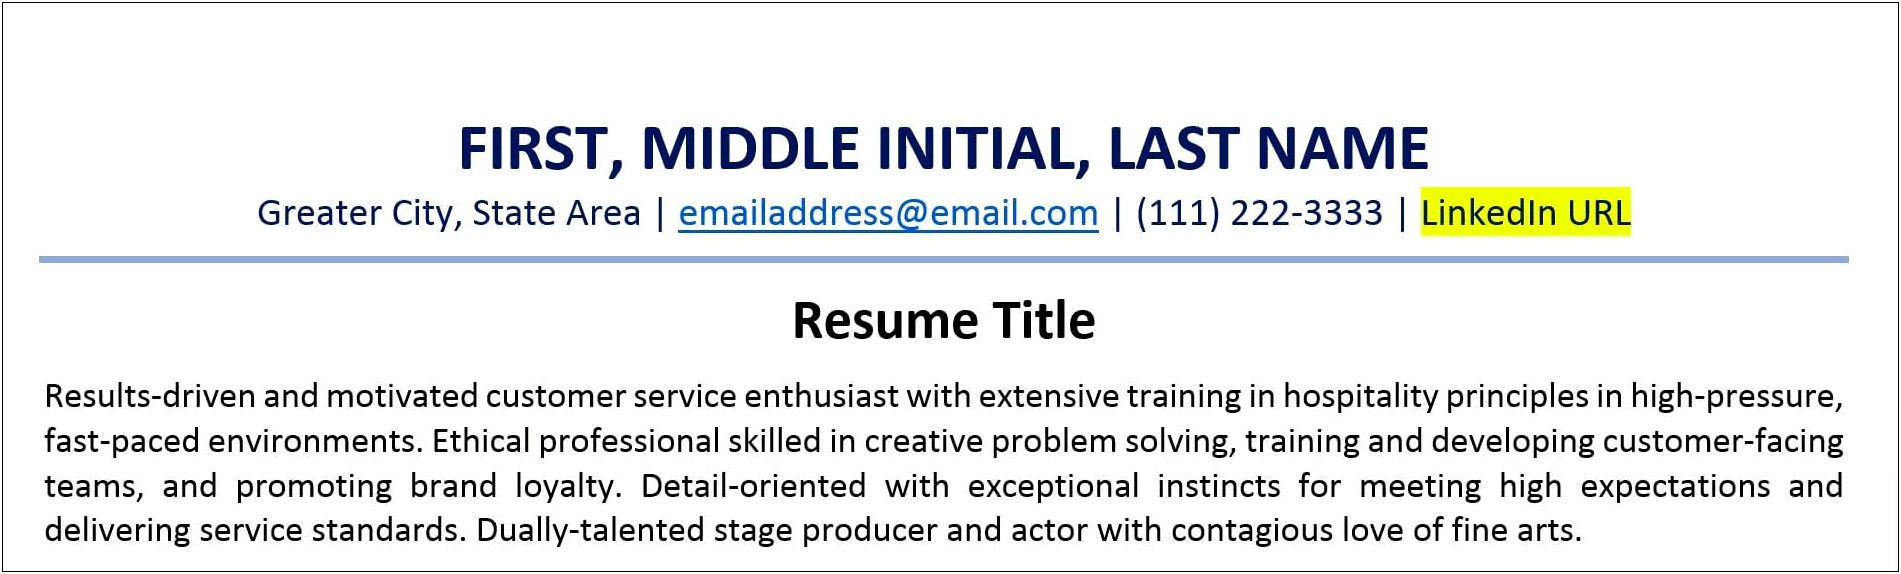 Professional Email Address For Resume Examples